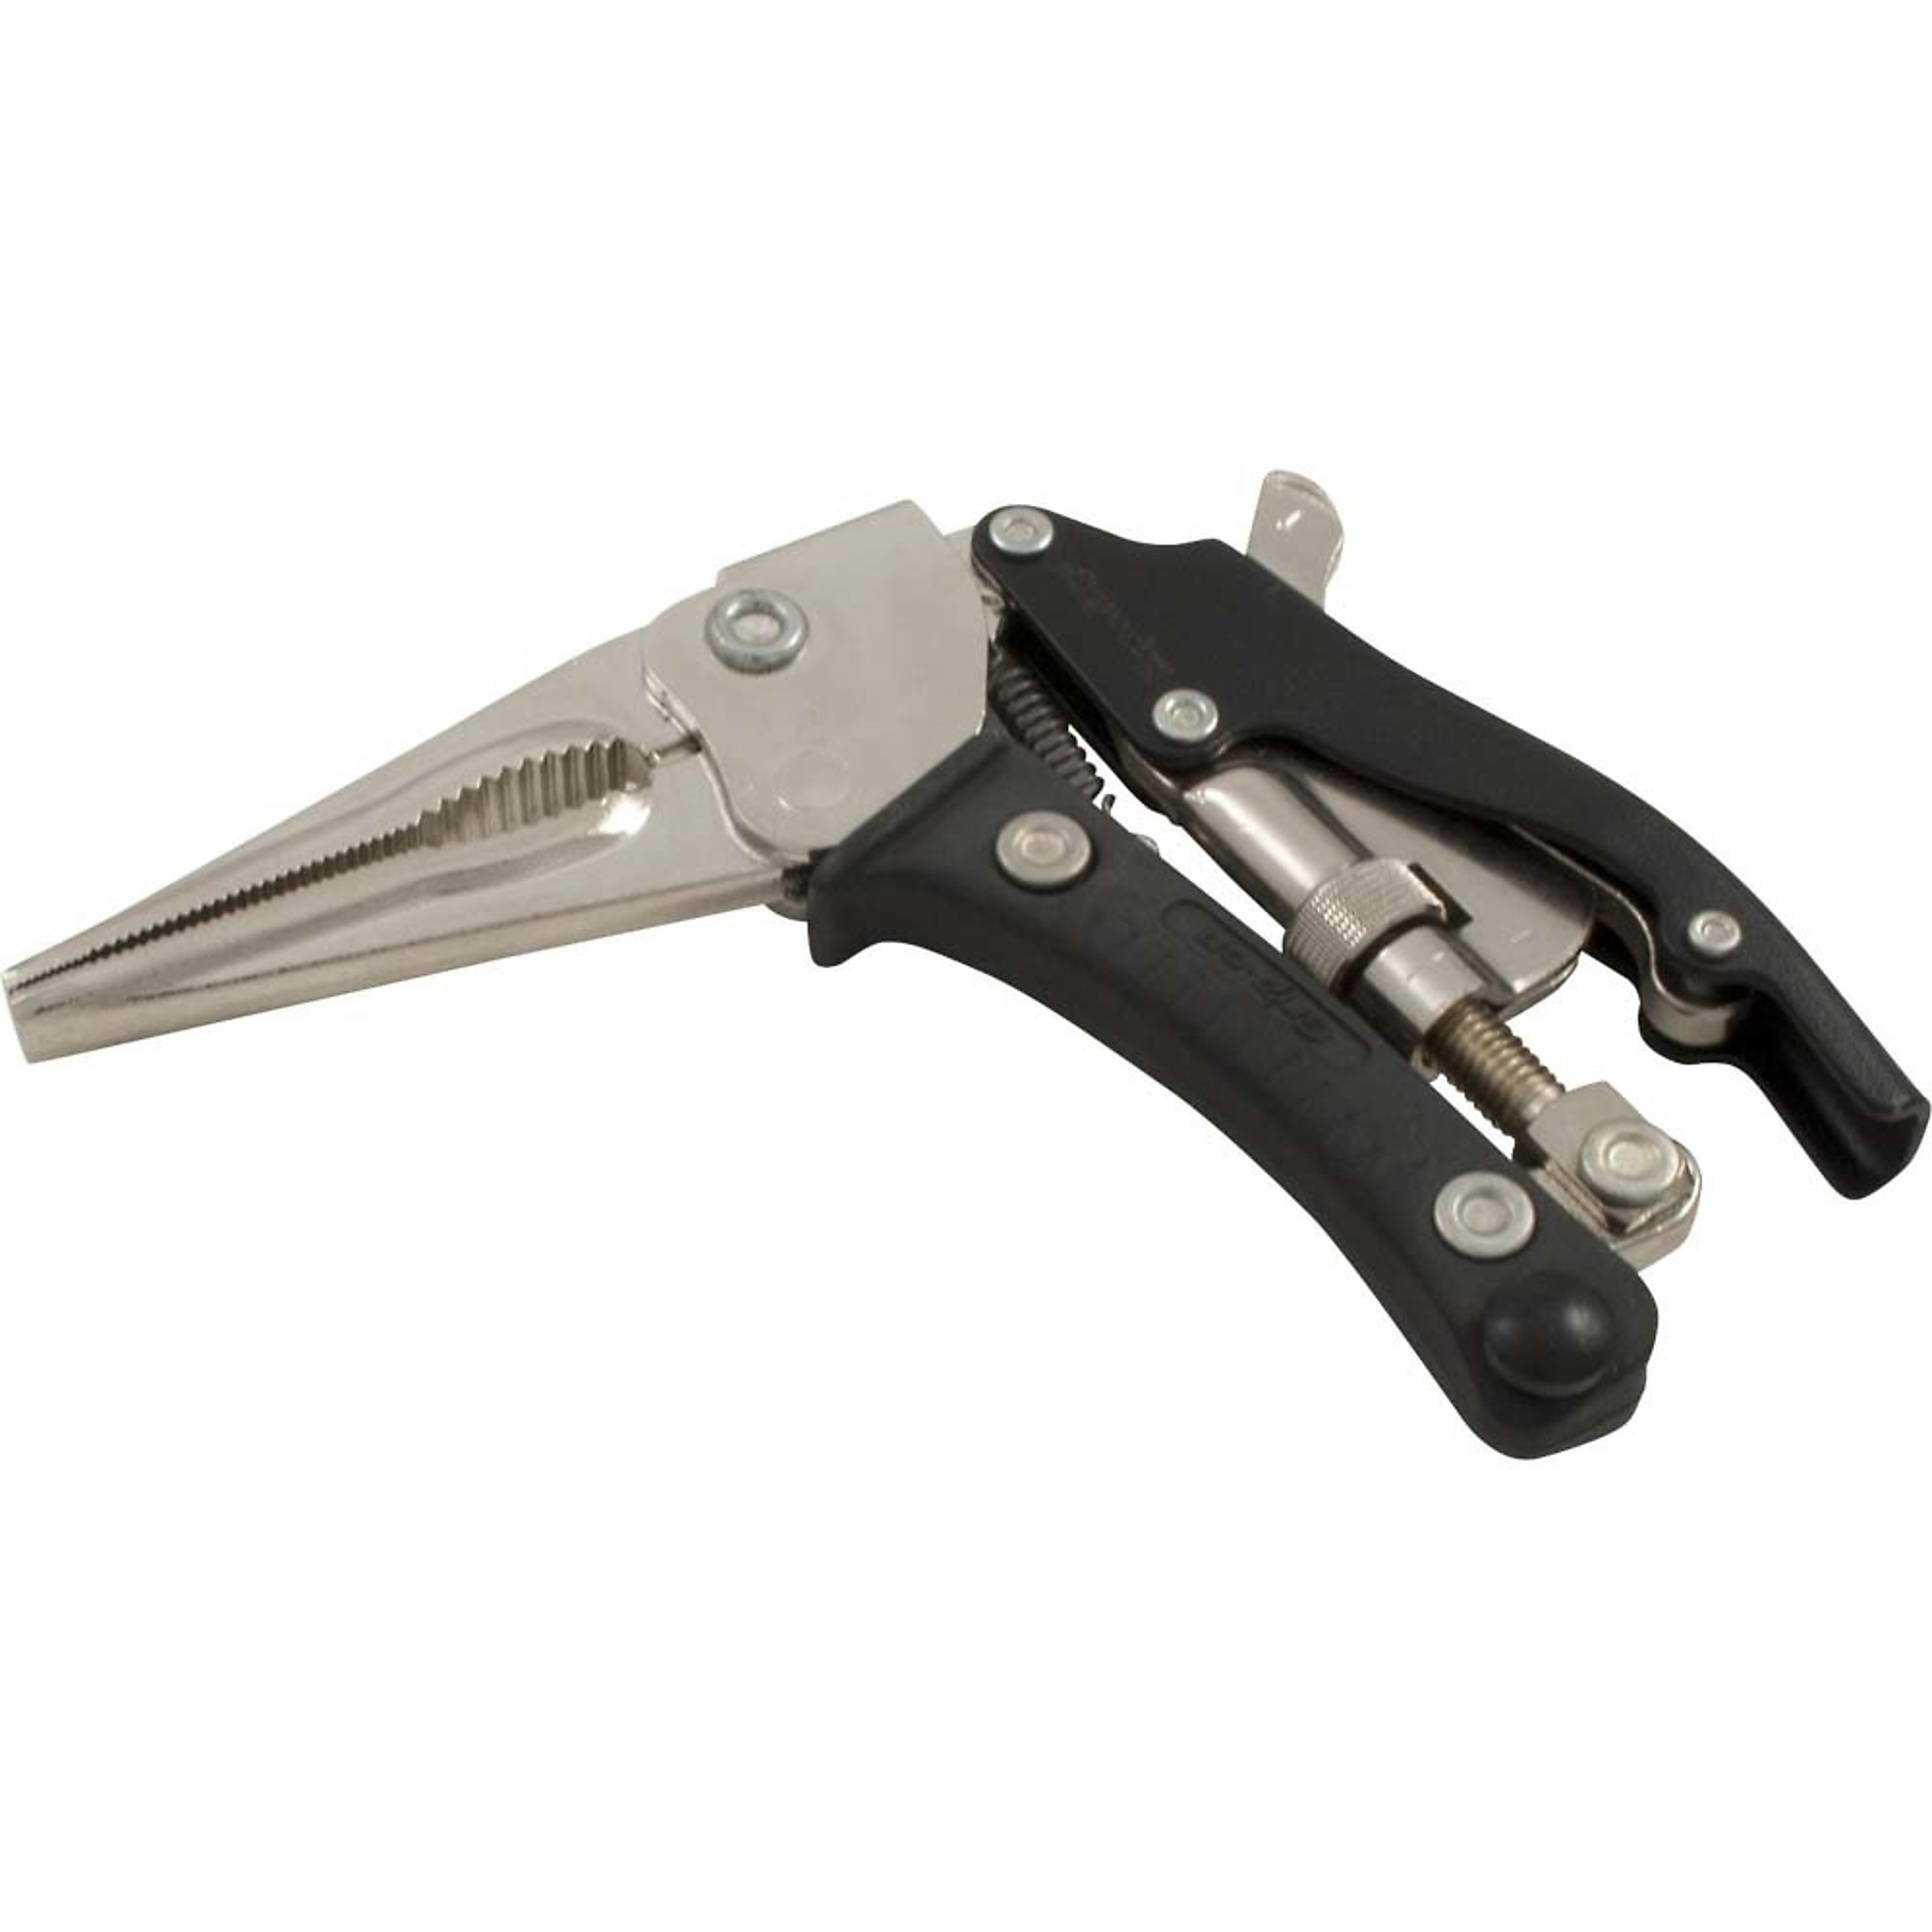 Grip-on, 8Inch Ergo grip Long Nose Locking Plier, Pieces (qty.) 1 Material Alloy Steel, Jaw Capacity 1.85 in, Model 727-08